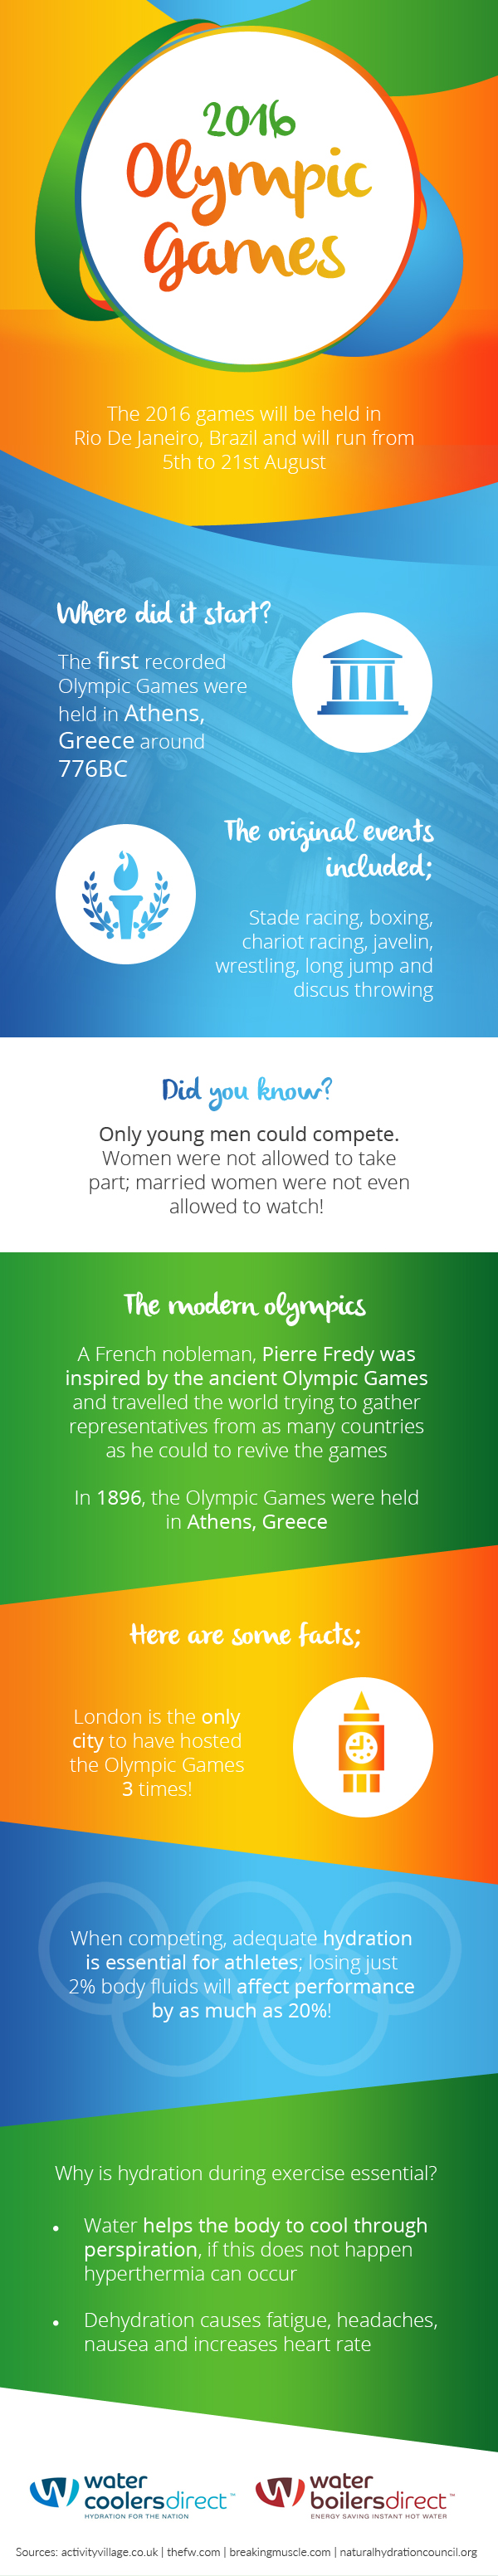 Hydration during 2016 Olympic Games